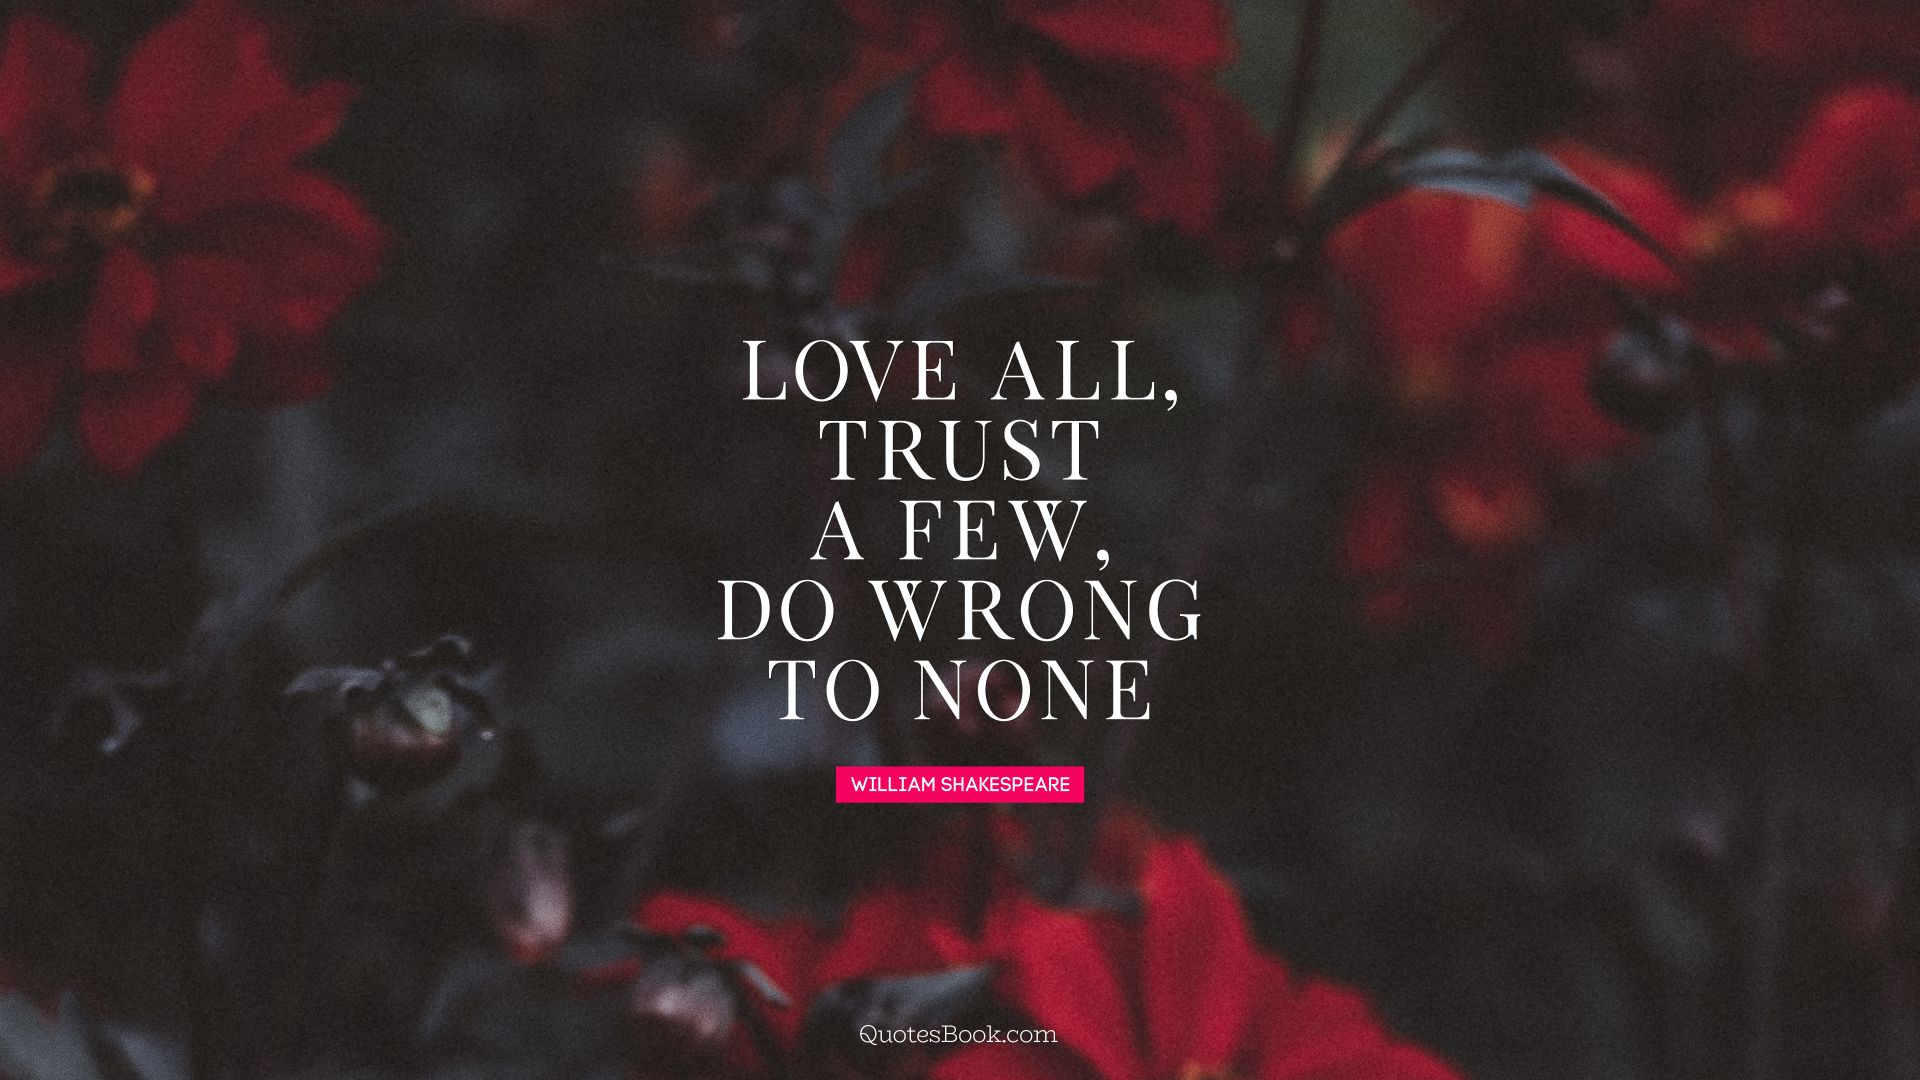 Love all, trust a few, do wrong to none. - Quote by William Shakespeare